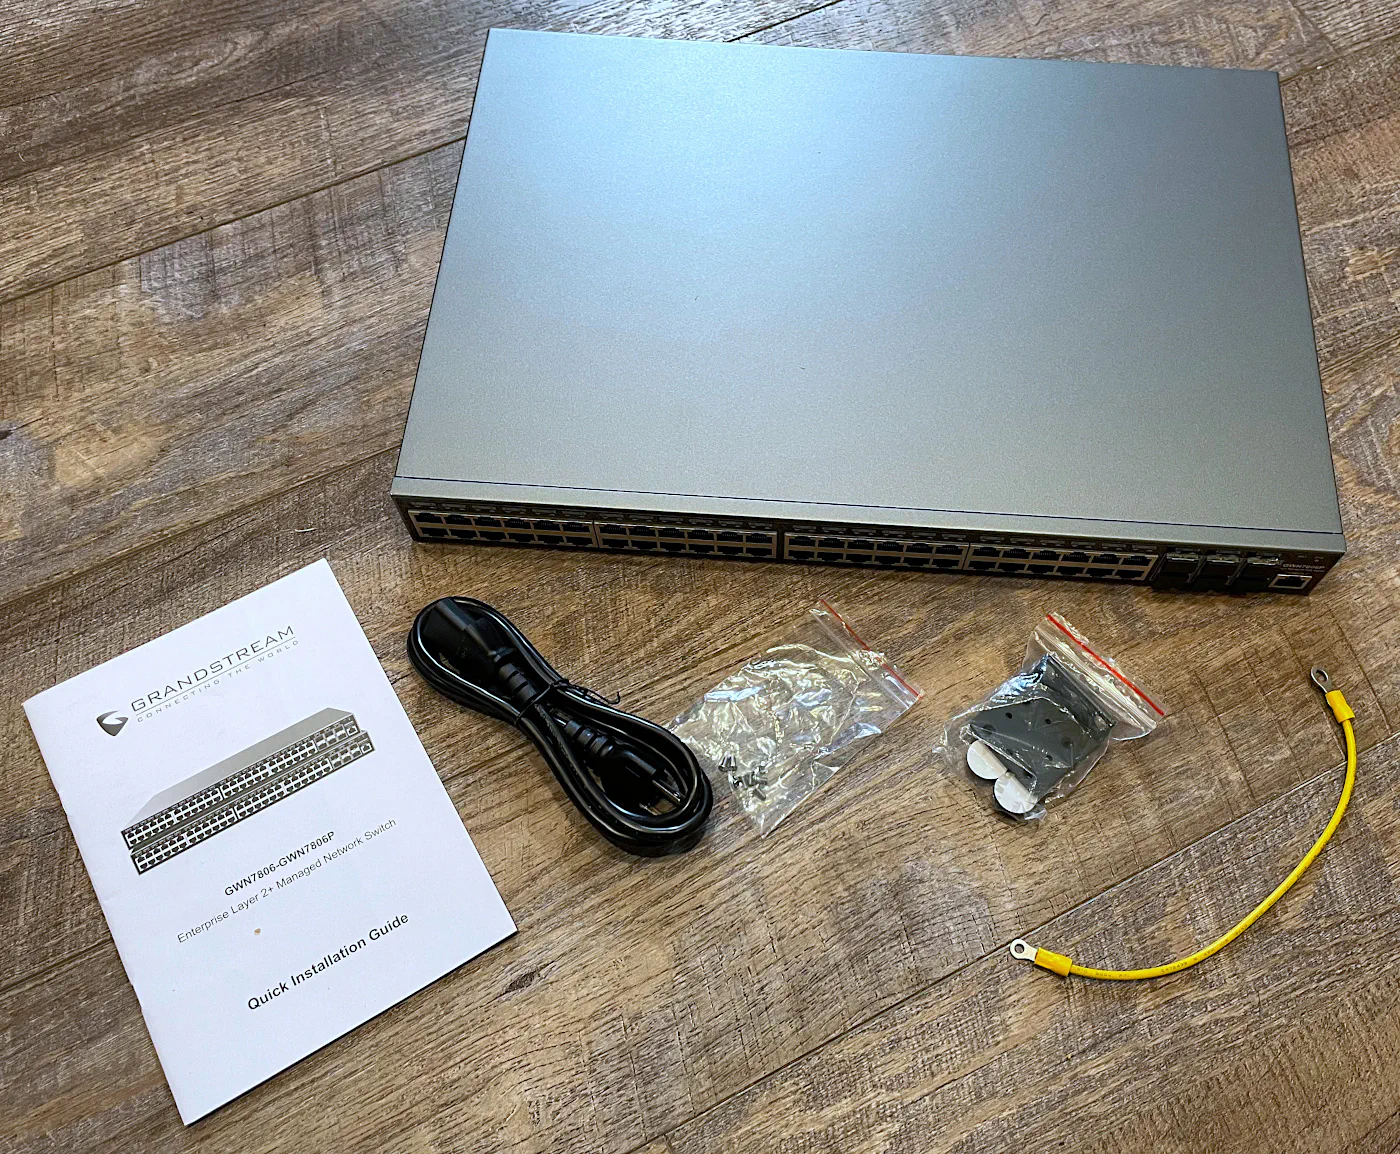 Unboxing the Grandstream Switch